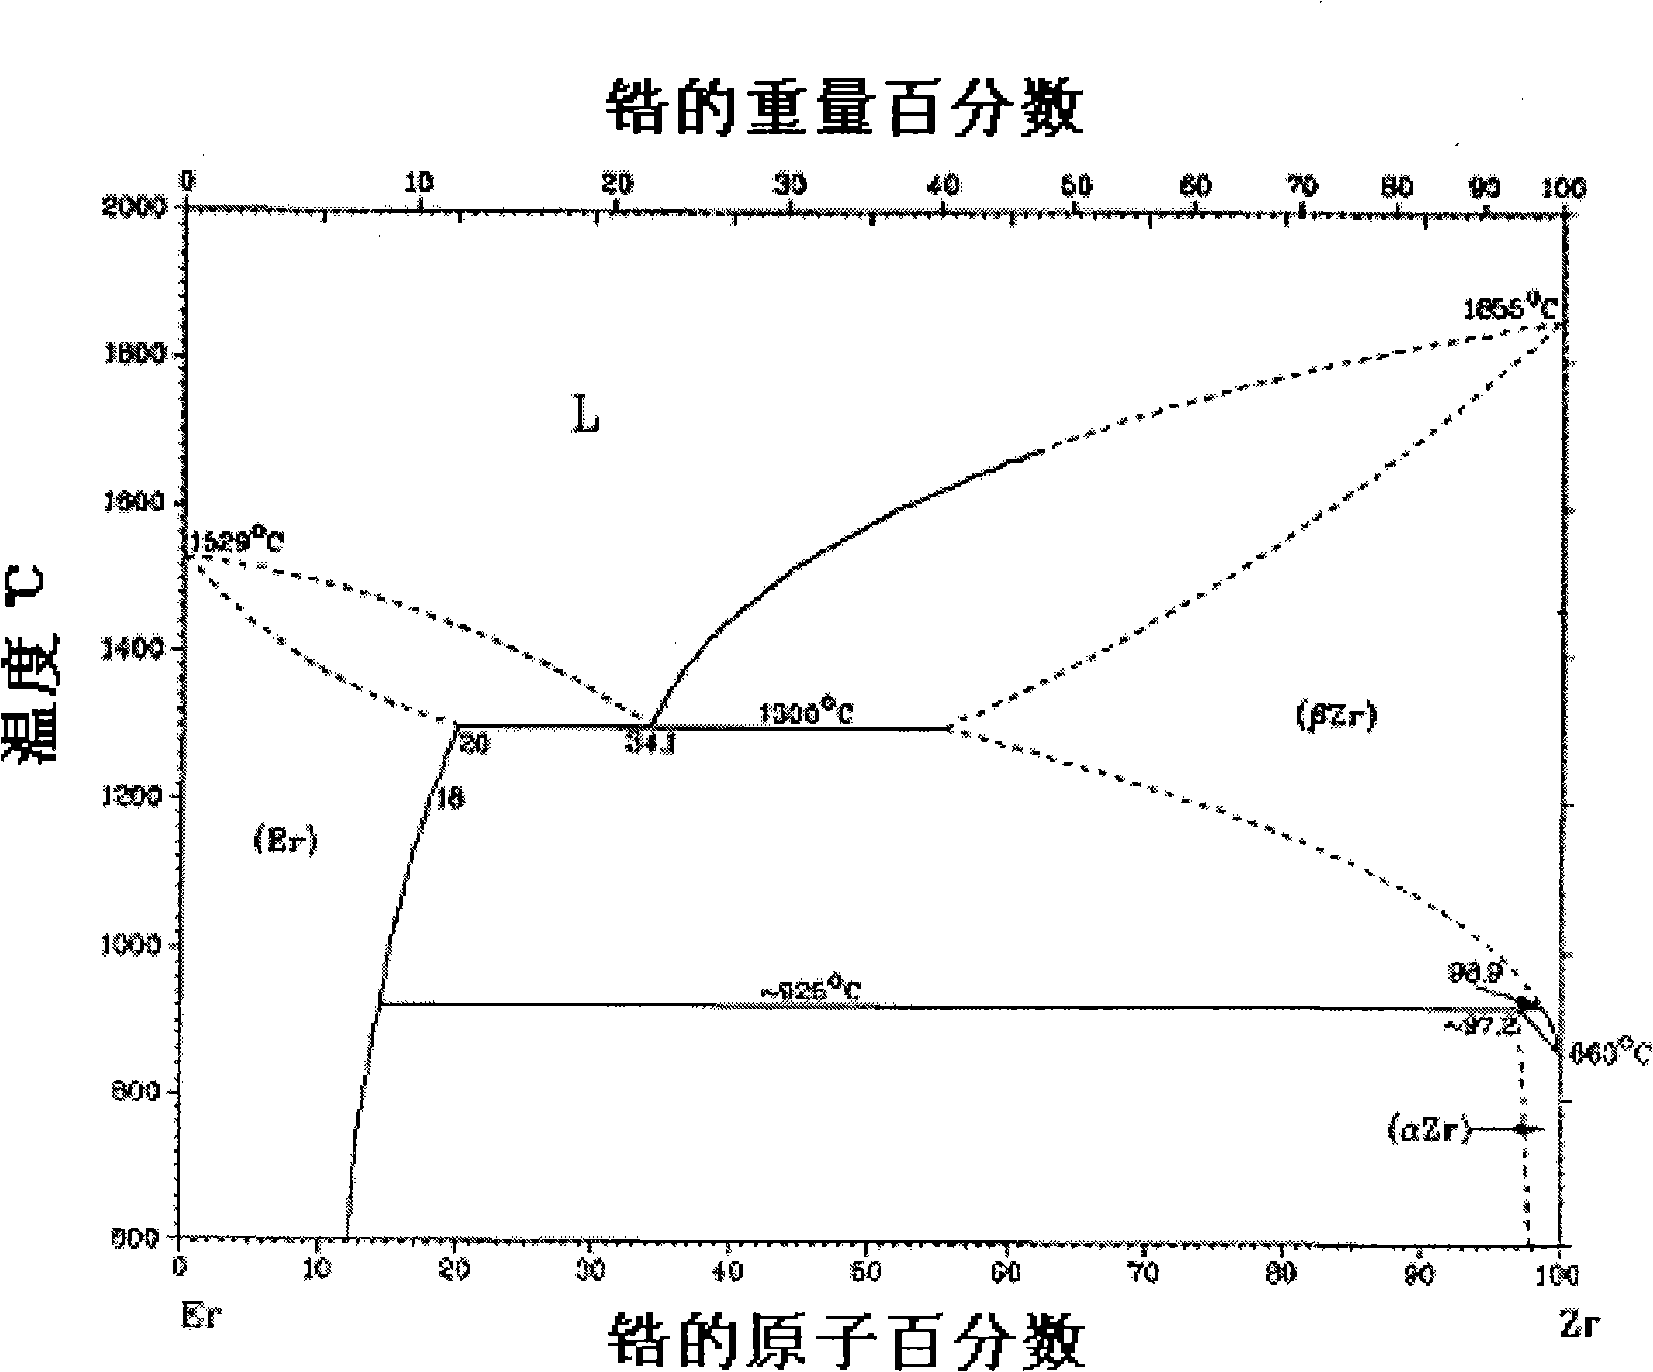 Erbium-containing zirconium alloy, method for preparing and shaping the same, and structural part containing said alloy